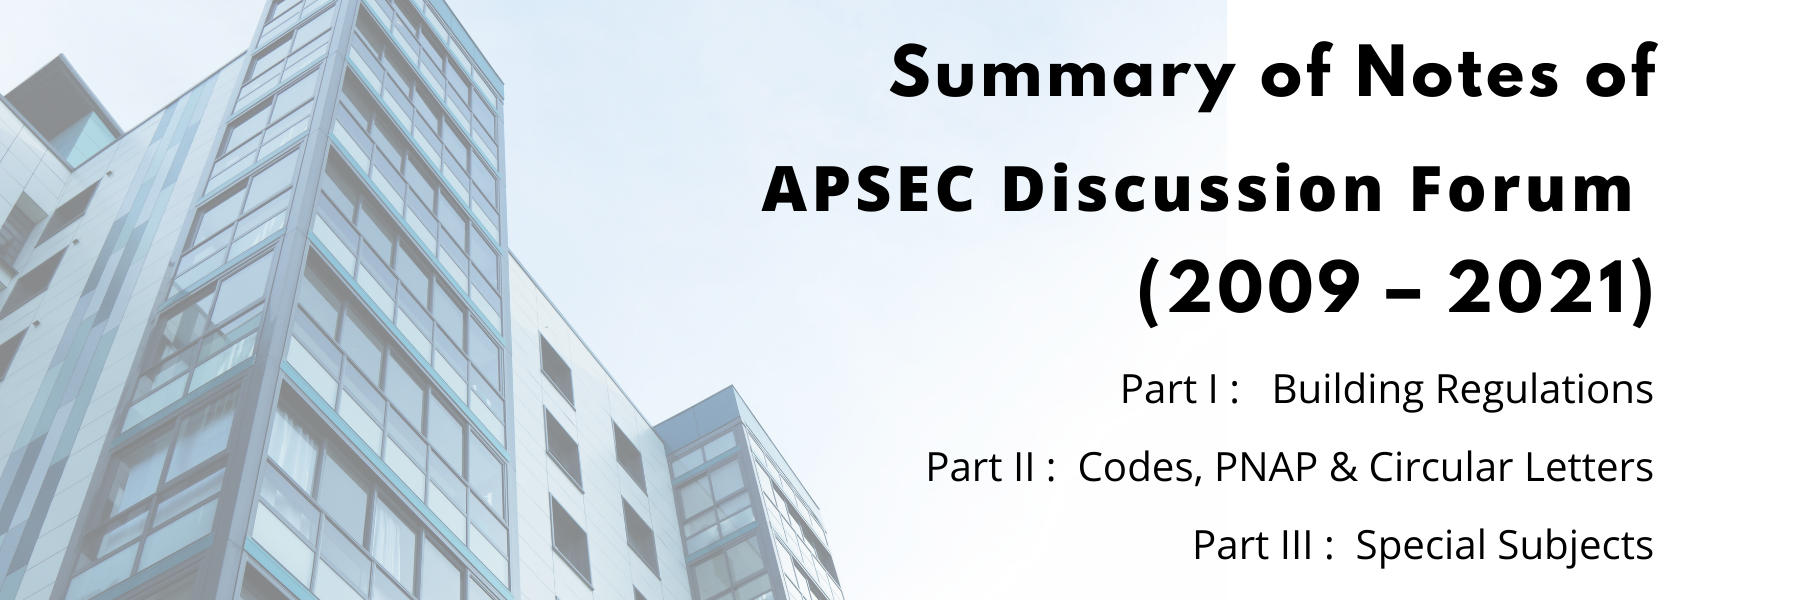 Summary of Notes of APSEC Discussion Forum held from 2009 - 2021 (Part I to III)